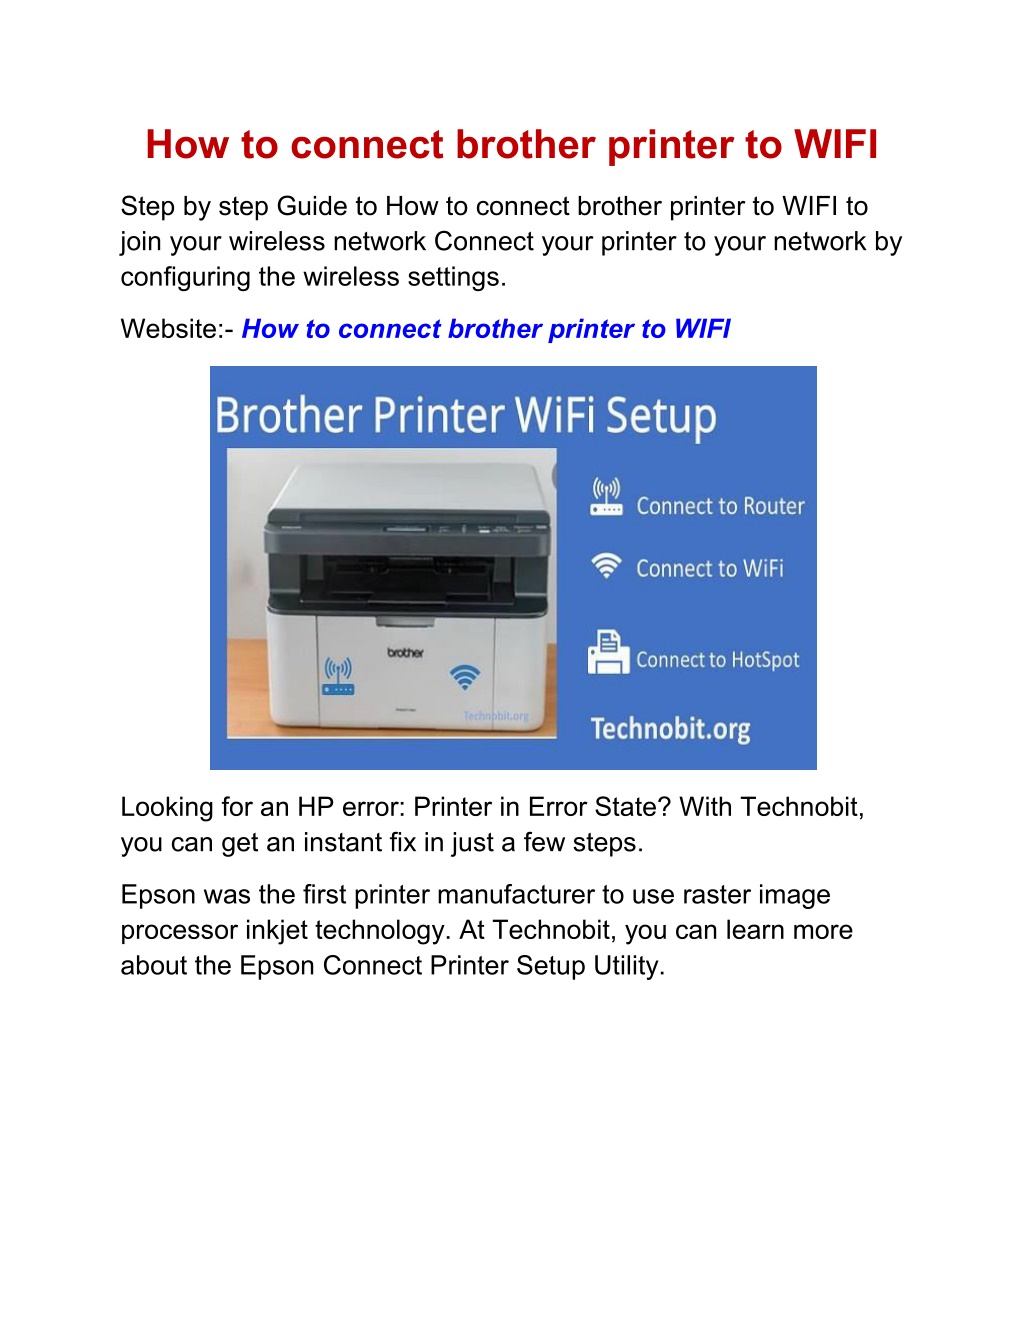 How to Connect Brother Printer to Wifi: Step-by-Step Guide